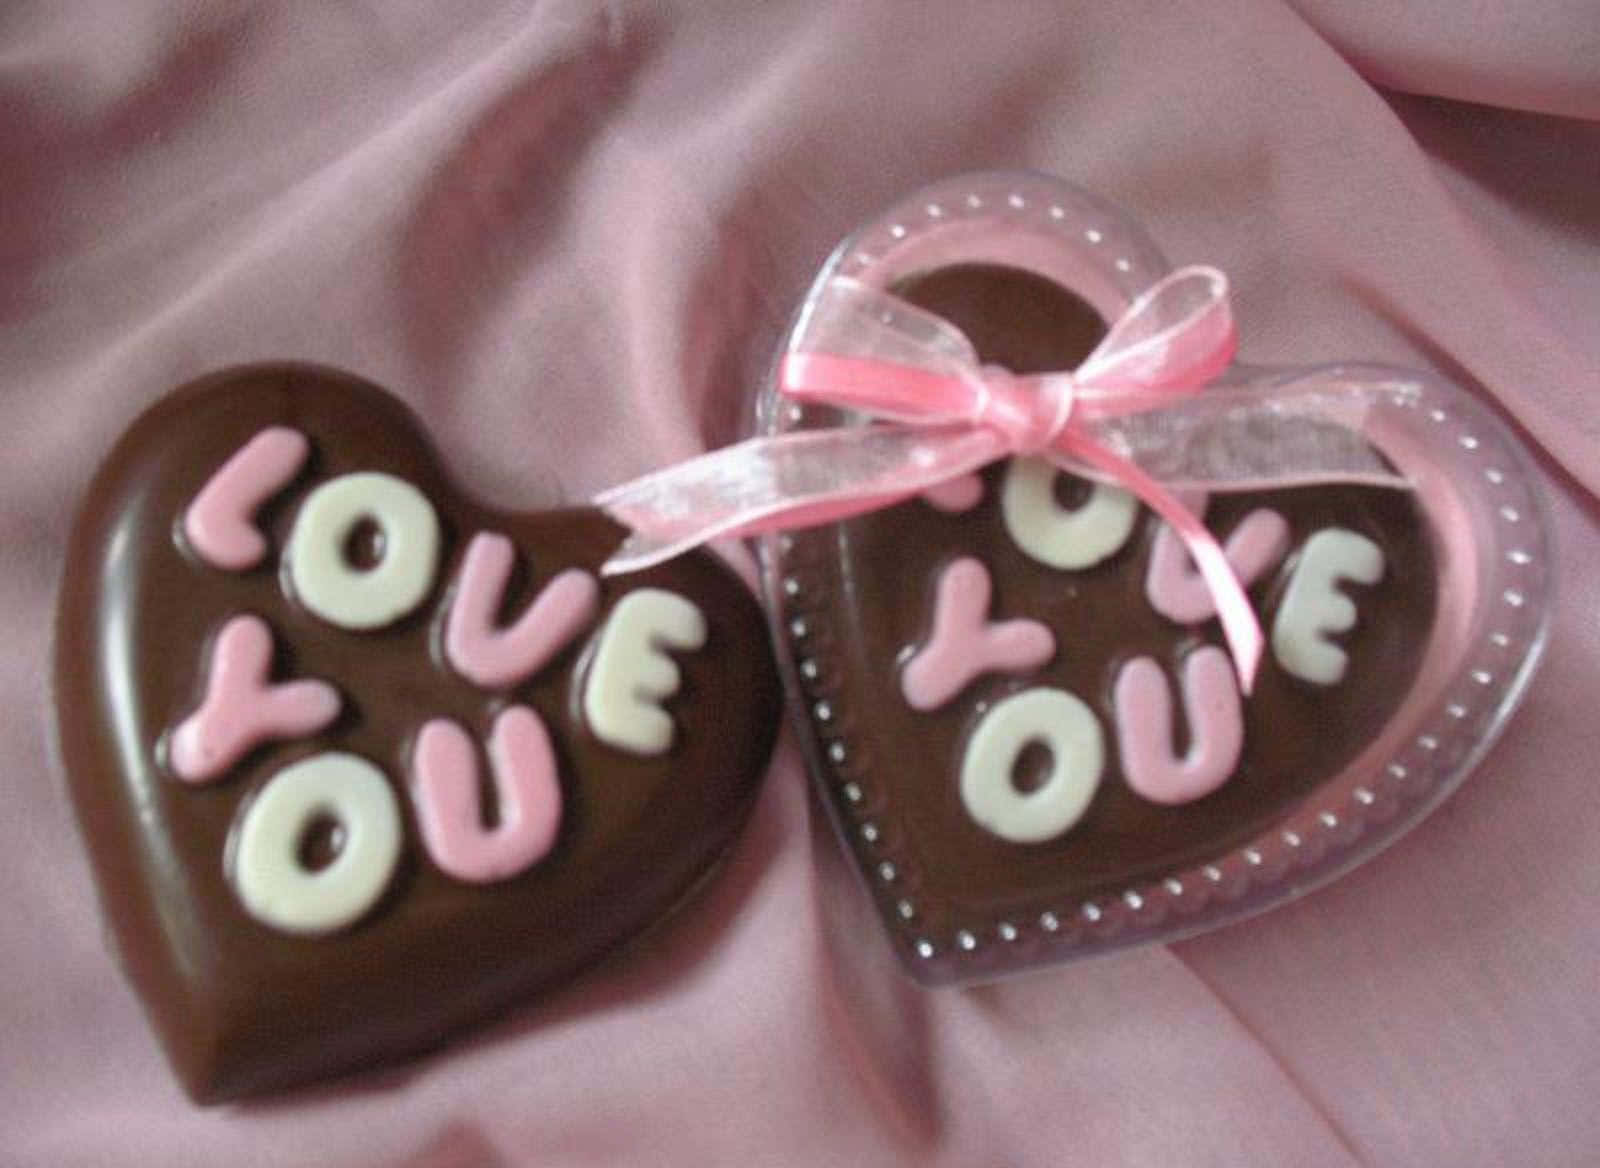 Chocolate Heart Shaped Chocolates With Love You Written On Them